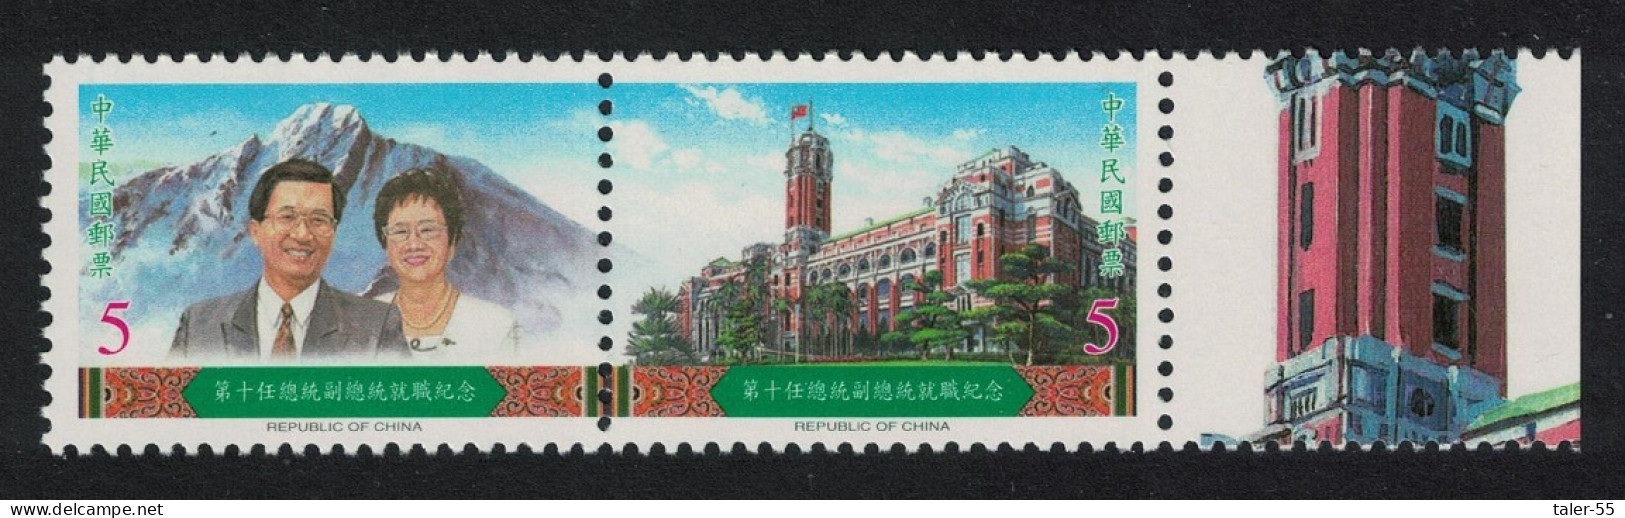 Taiwan Inauguration Of Chen Shui-bian 2v Margins 2000 MNH SG#2642-2643 - Unused Stamps